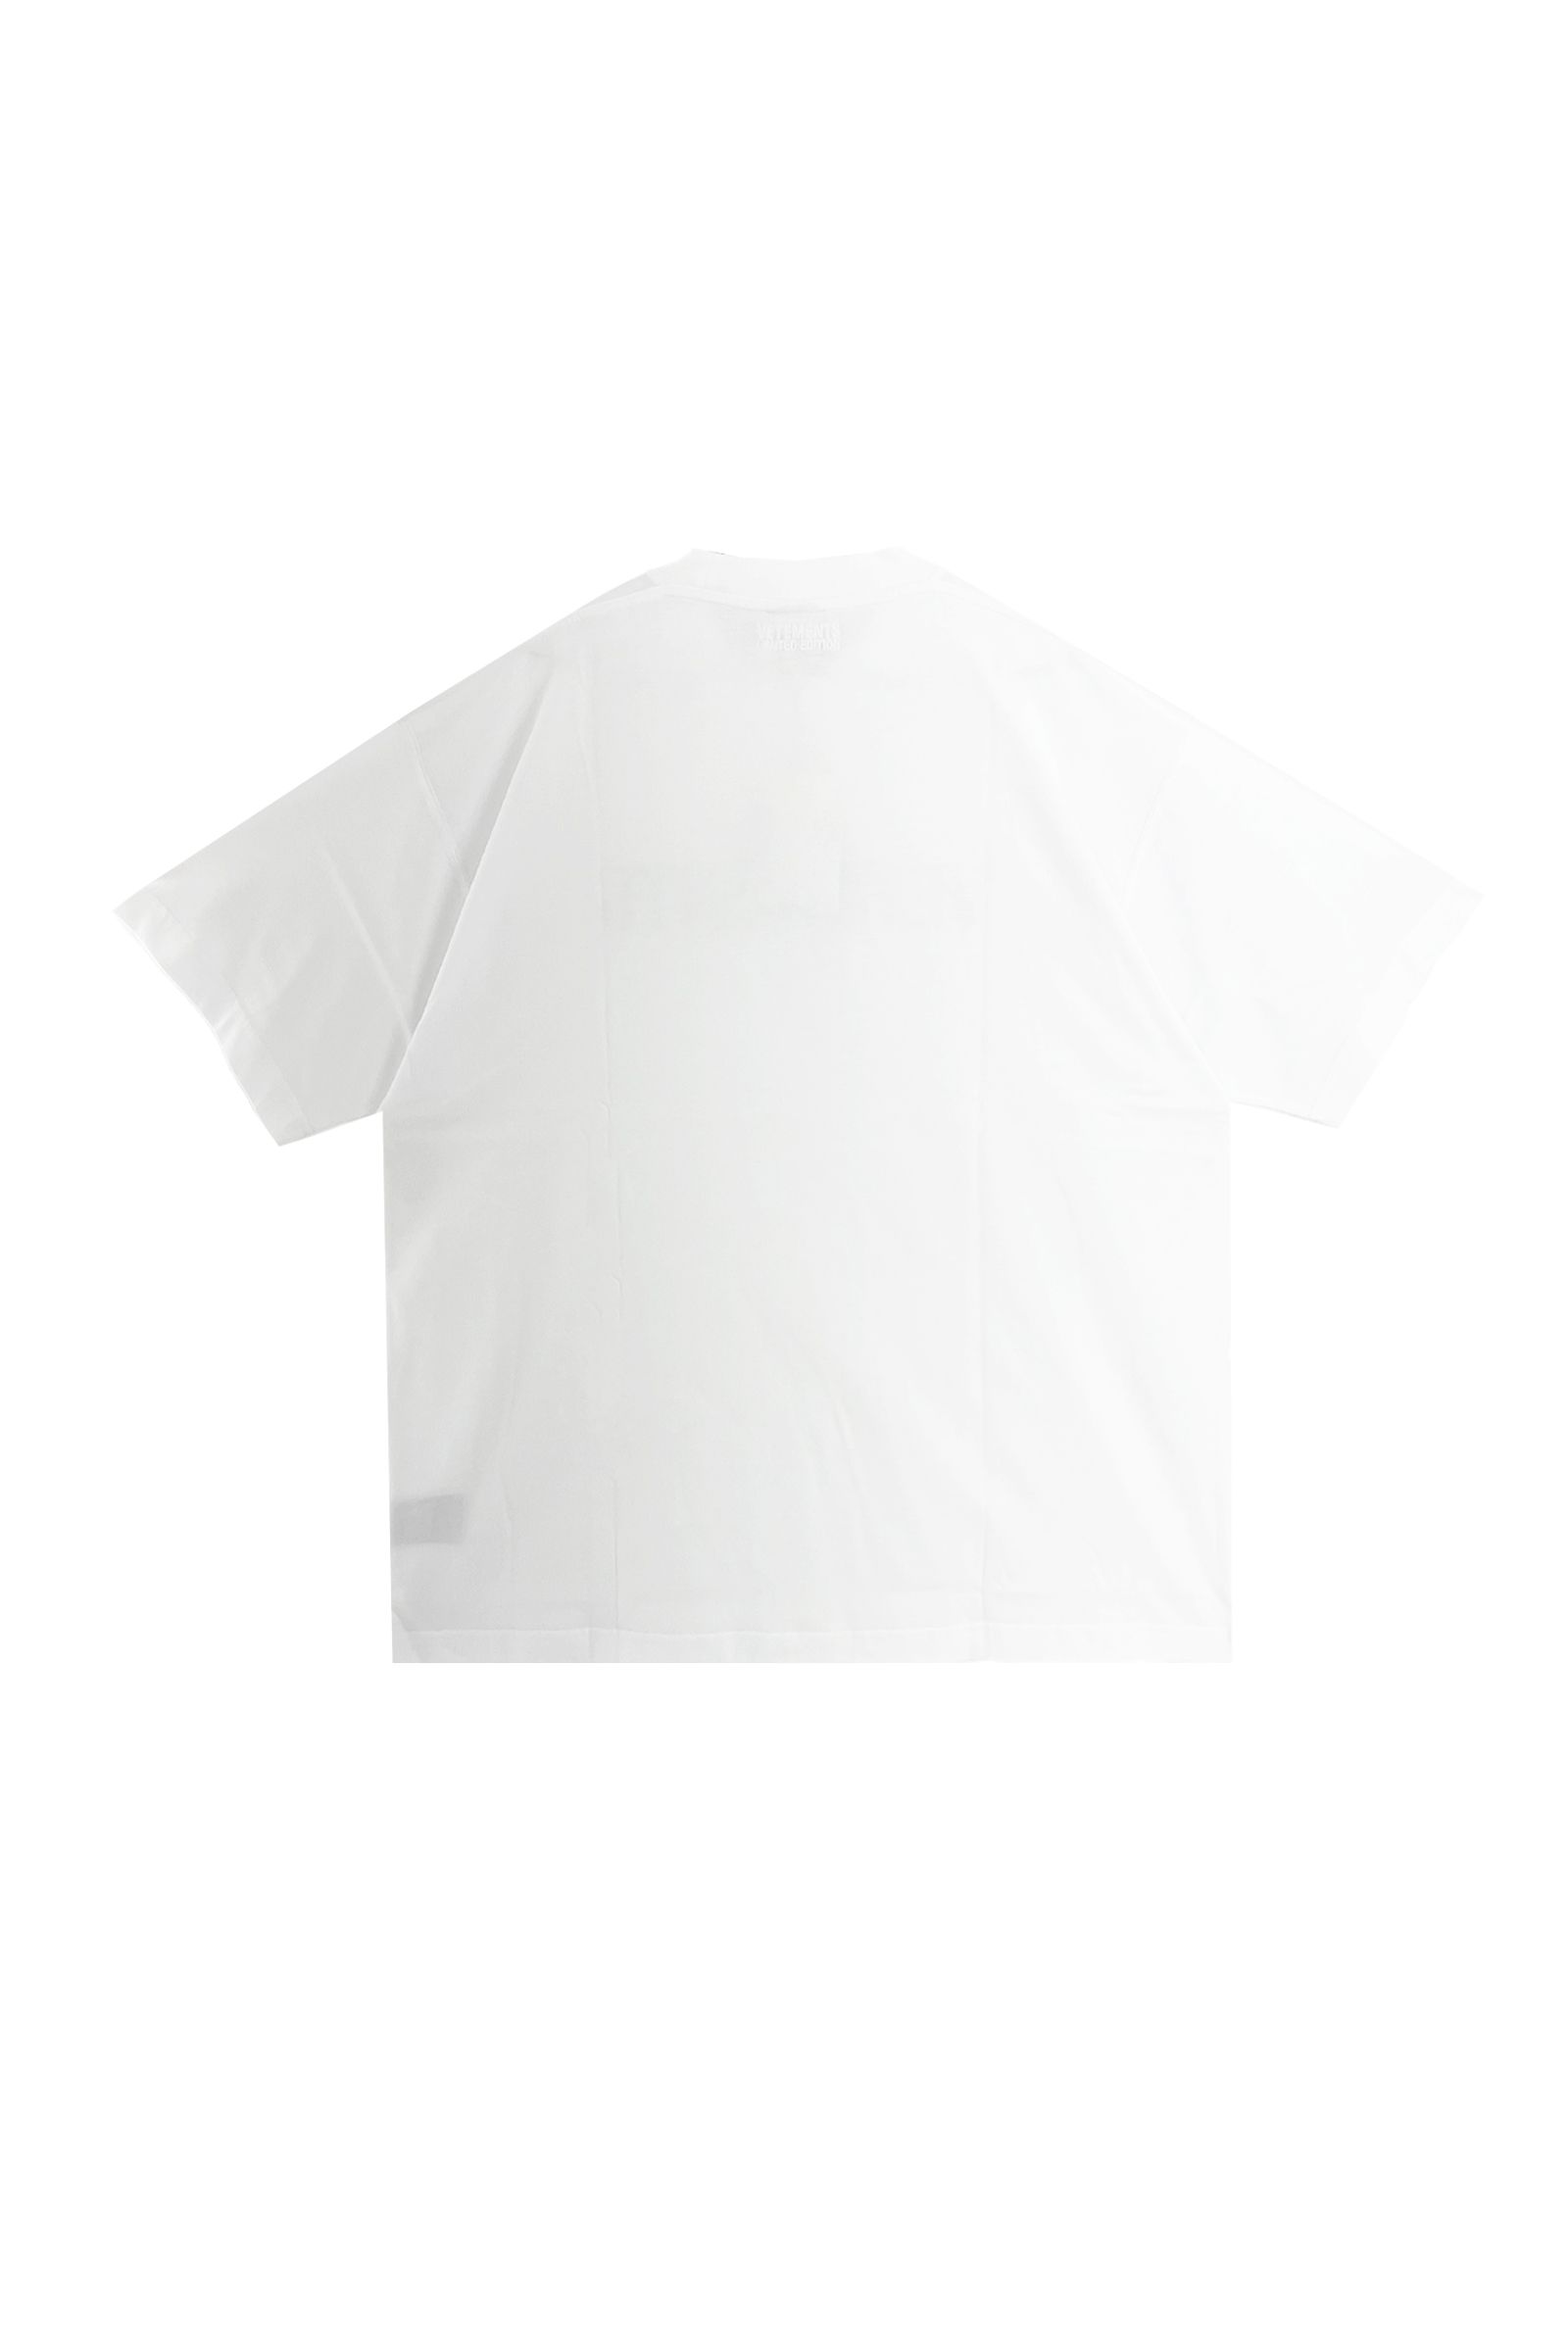 MY NAME IS VETEMENTS T-SHIRT/WHITE - XS